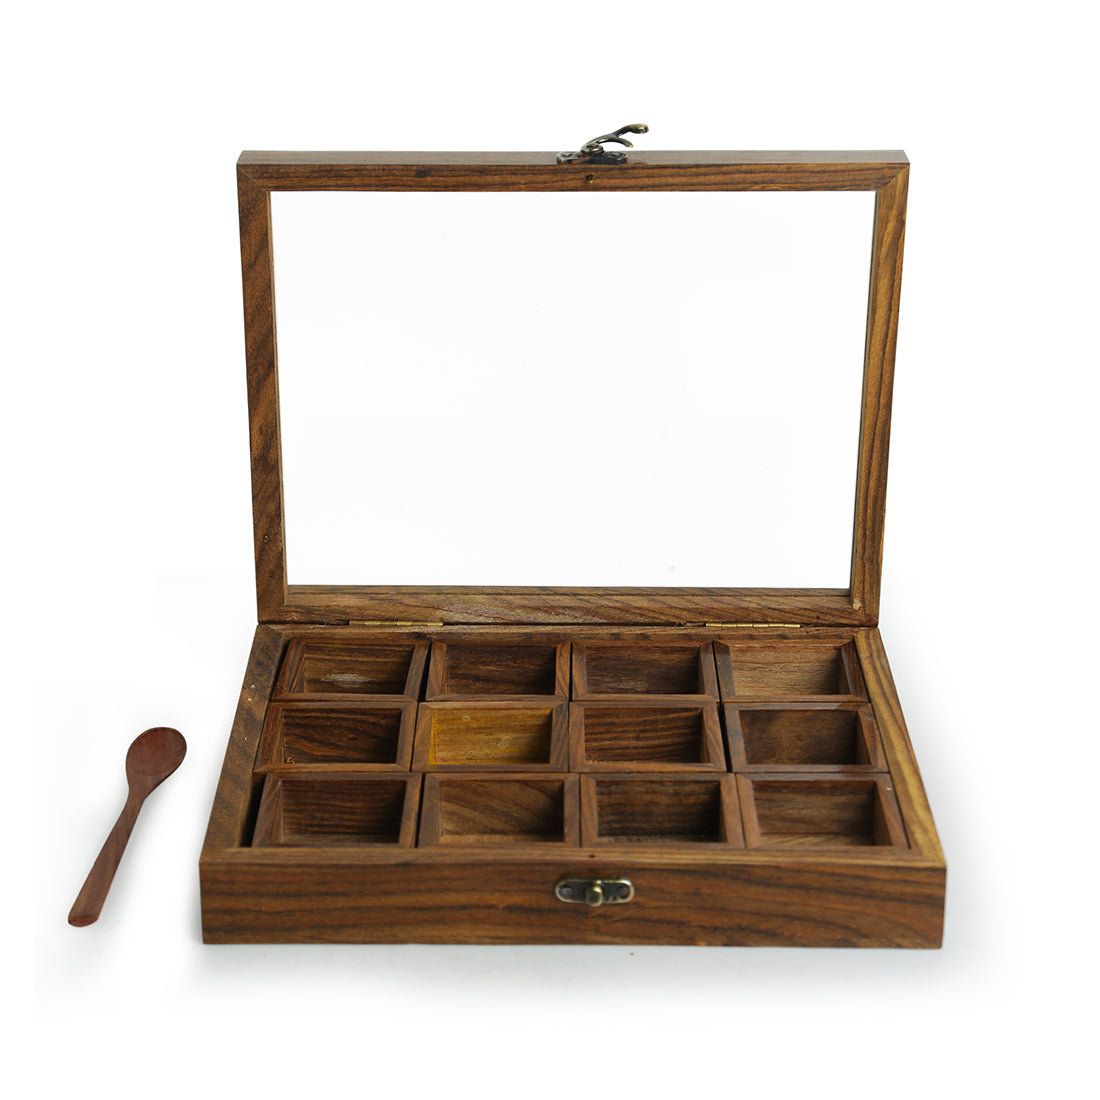 'Twelve Blends' Spice Box With 12 Containers & Spoon In Sheesham Wood